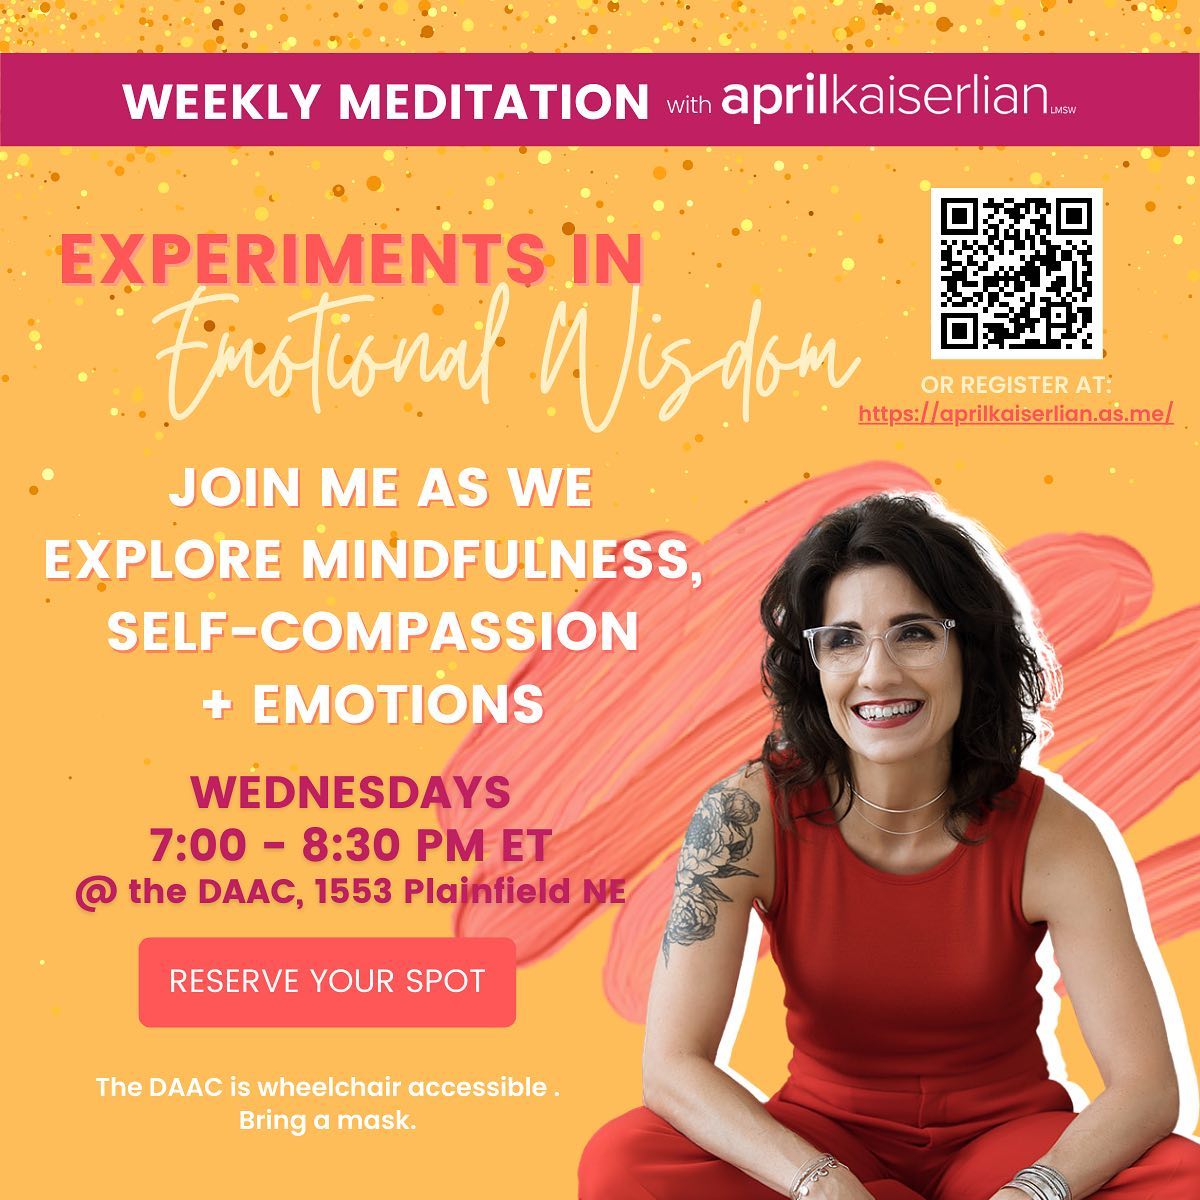 April sits in a relaxed pose in an image with details about the weekly meditation